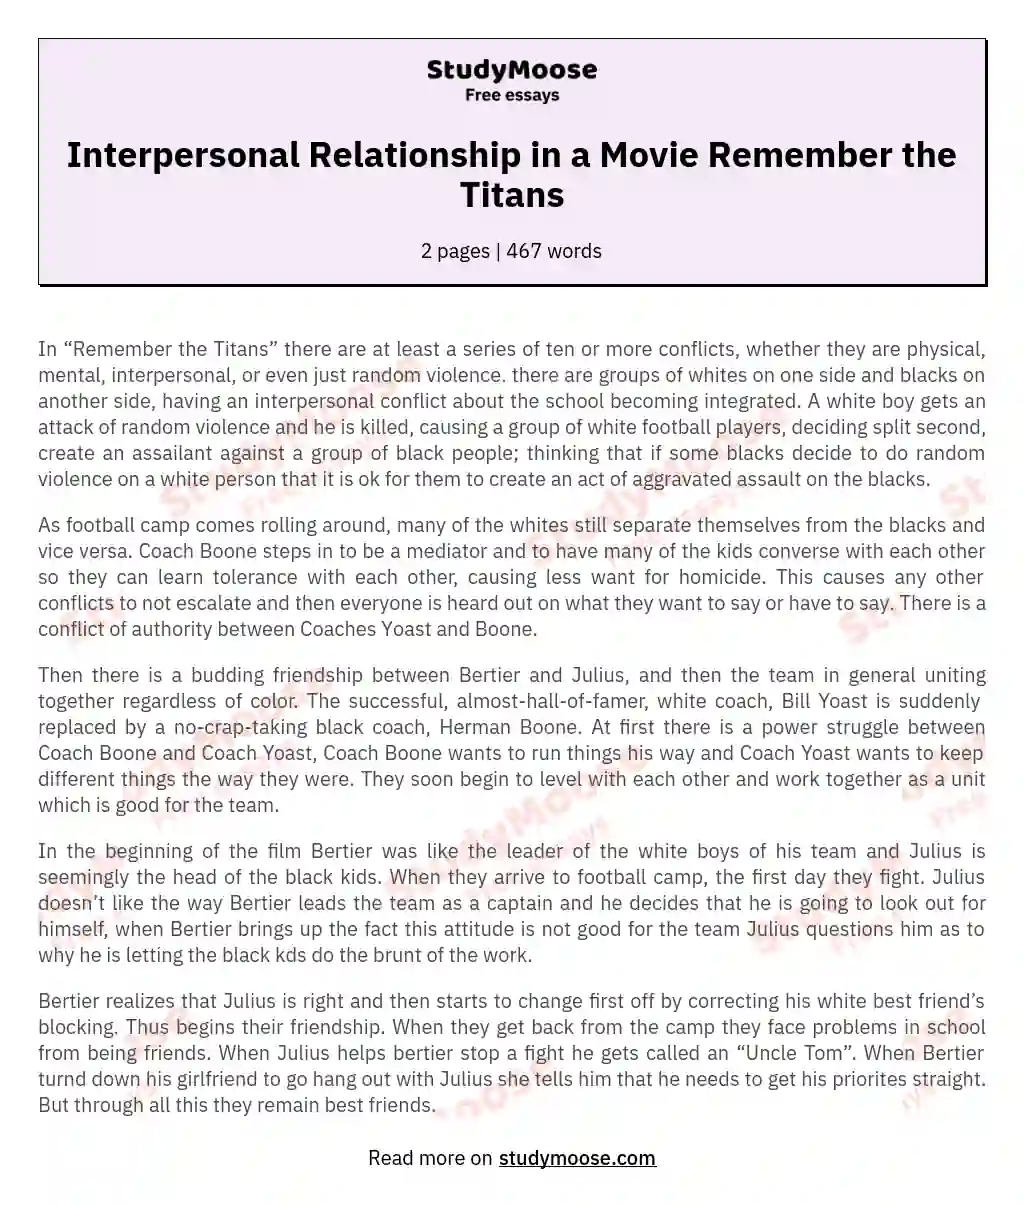 Interpersonal Relationship in a Movie Remember the Titans